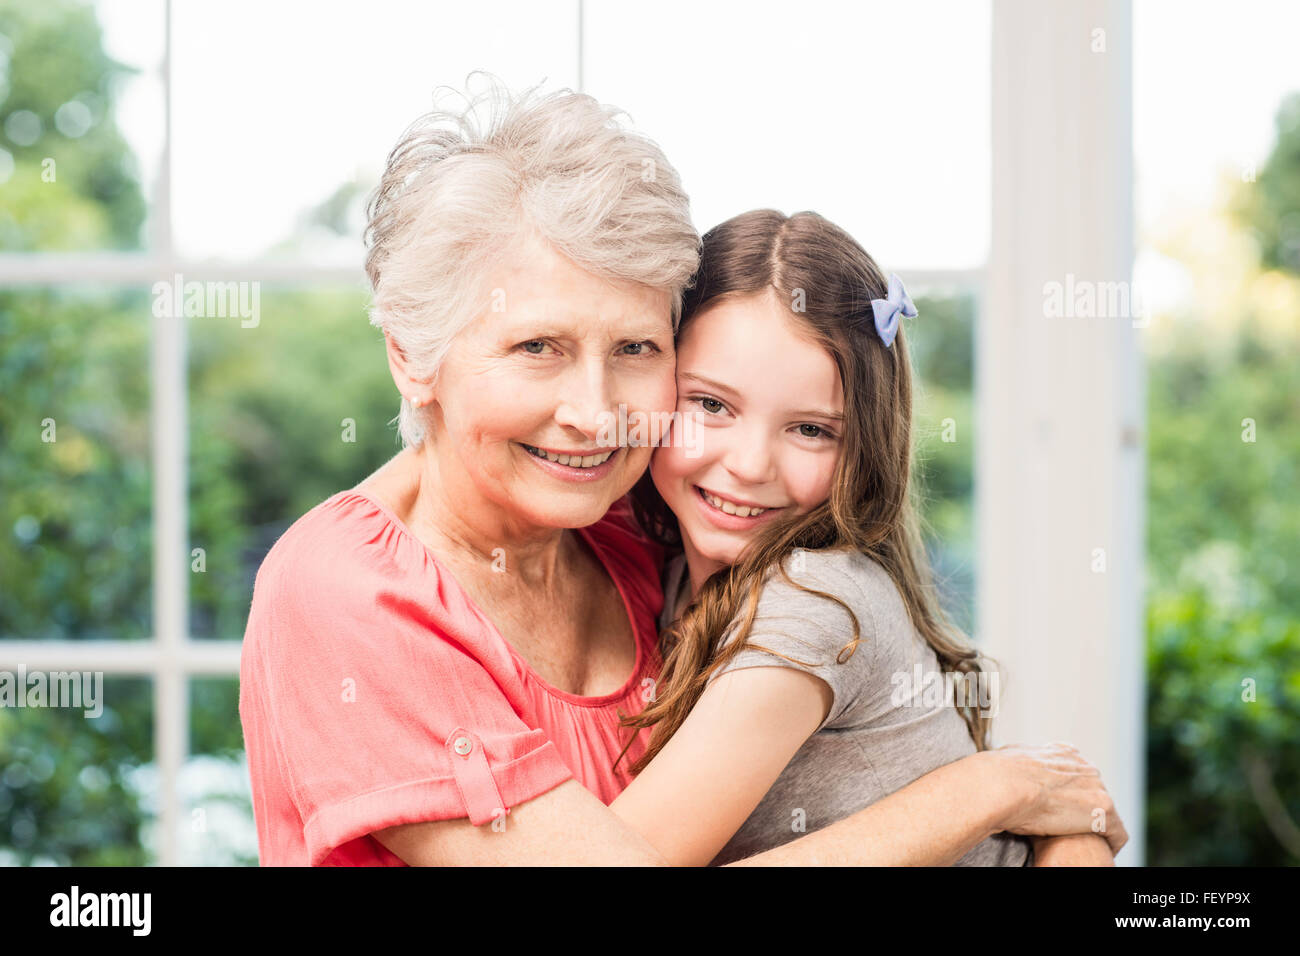 Grandmother and granddaughter embracing Stock Photo